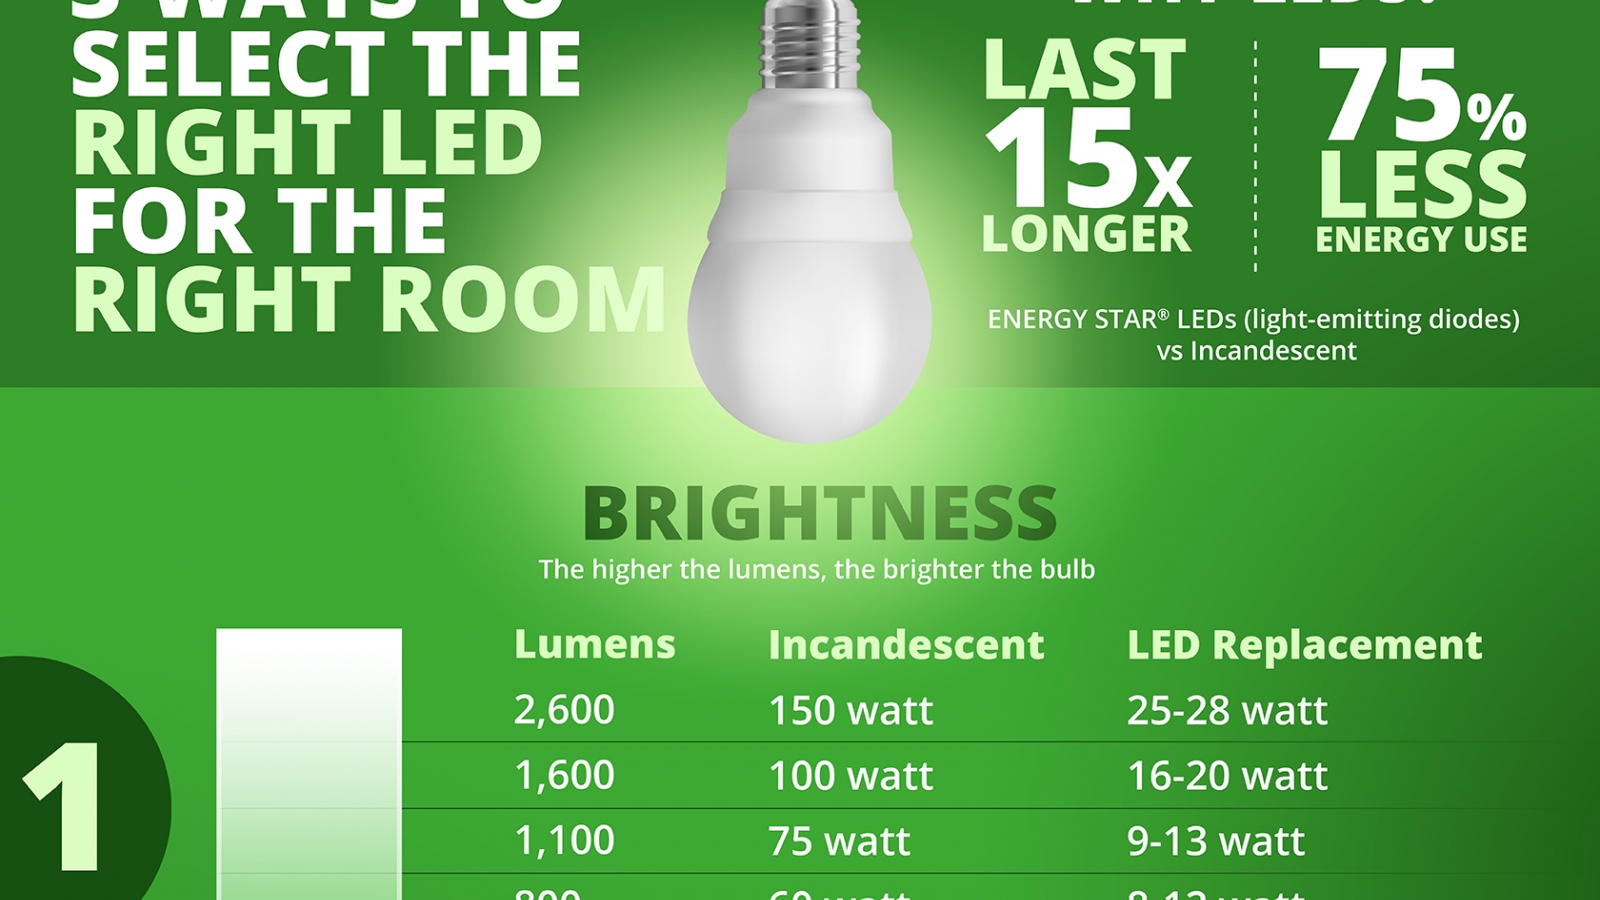 3 ways to select the right LED for the right room infographic